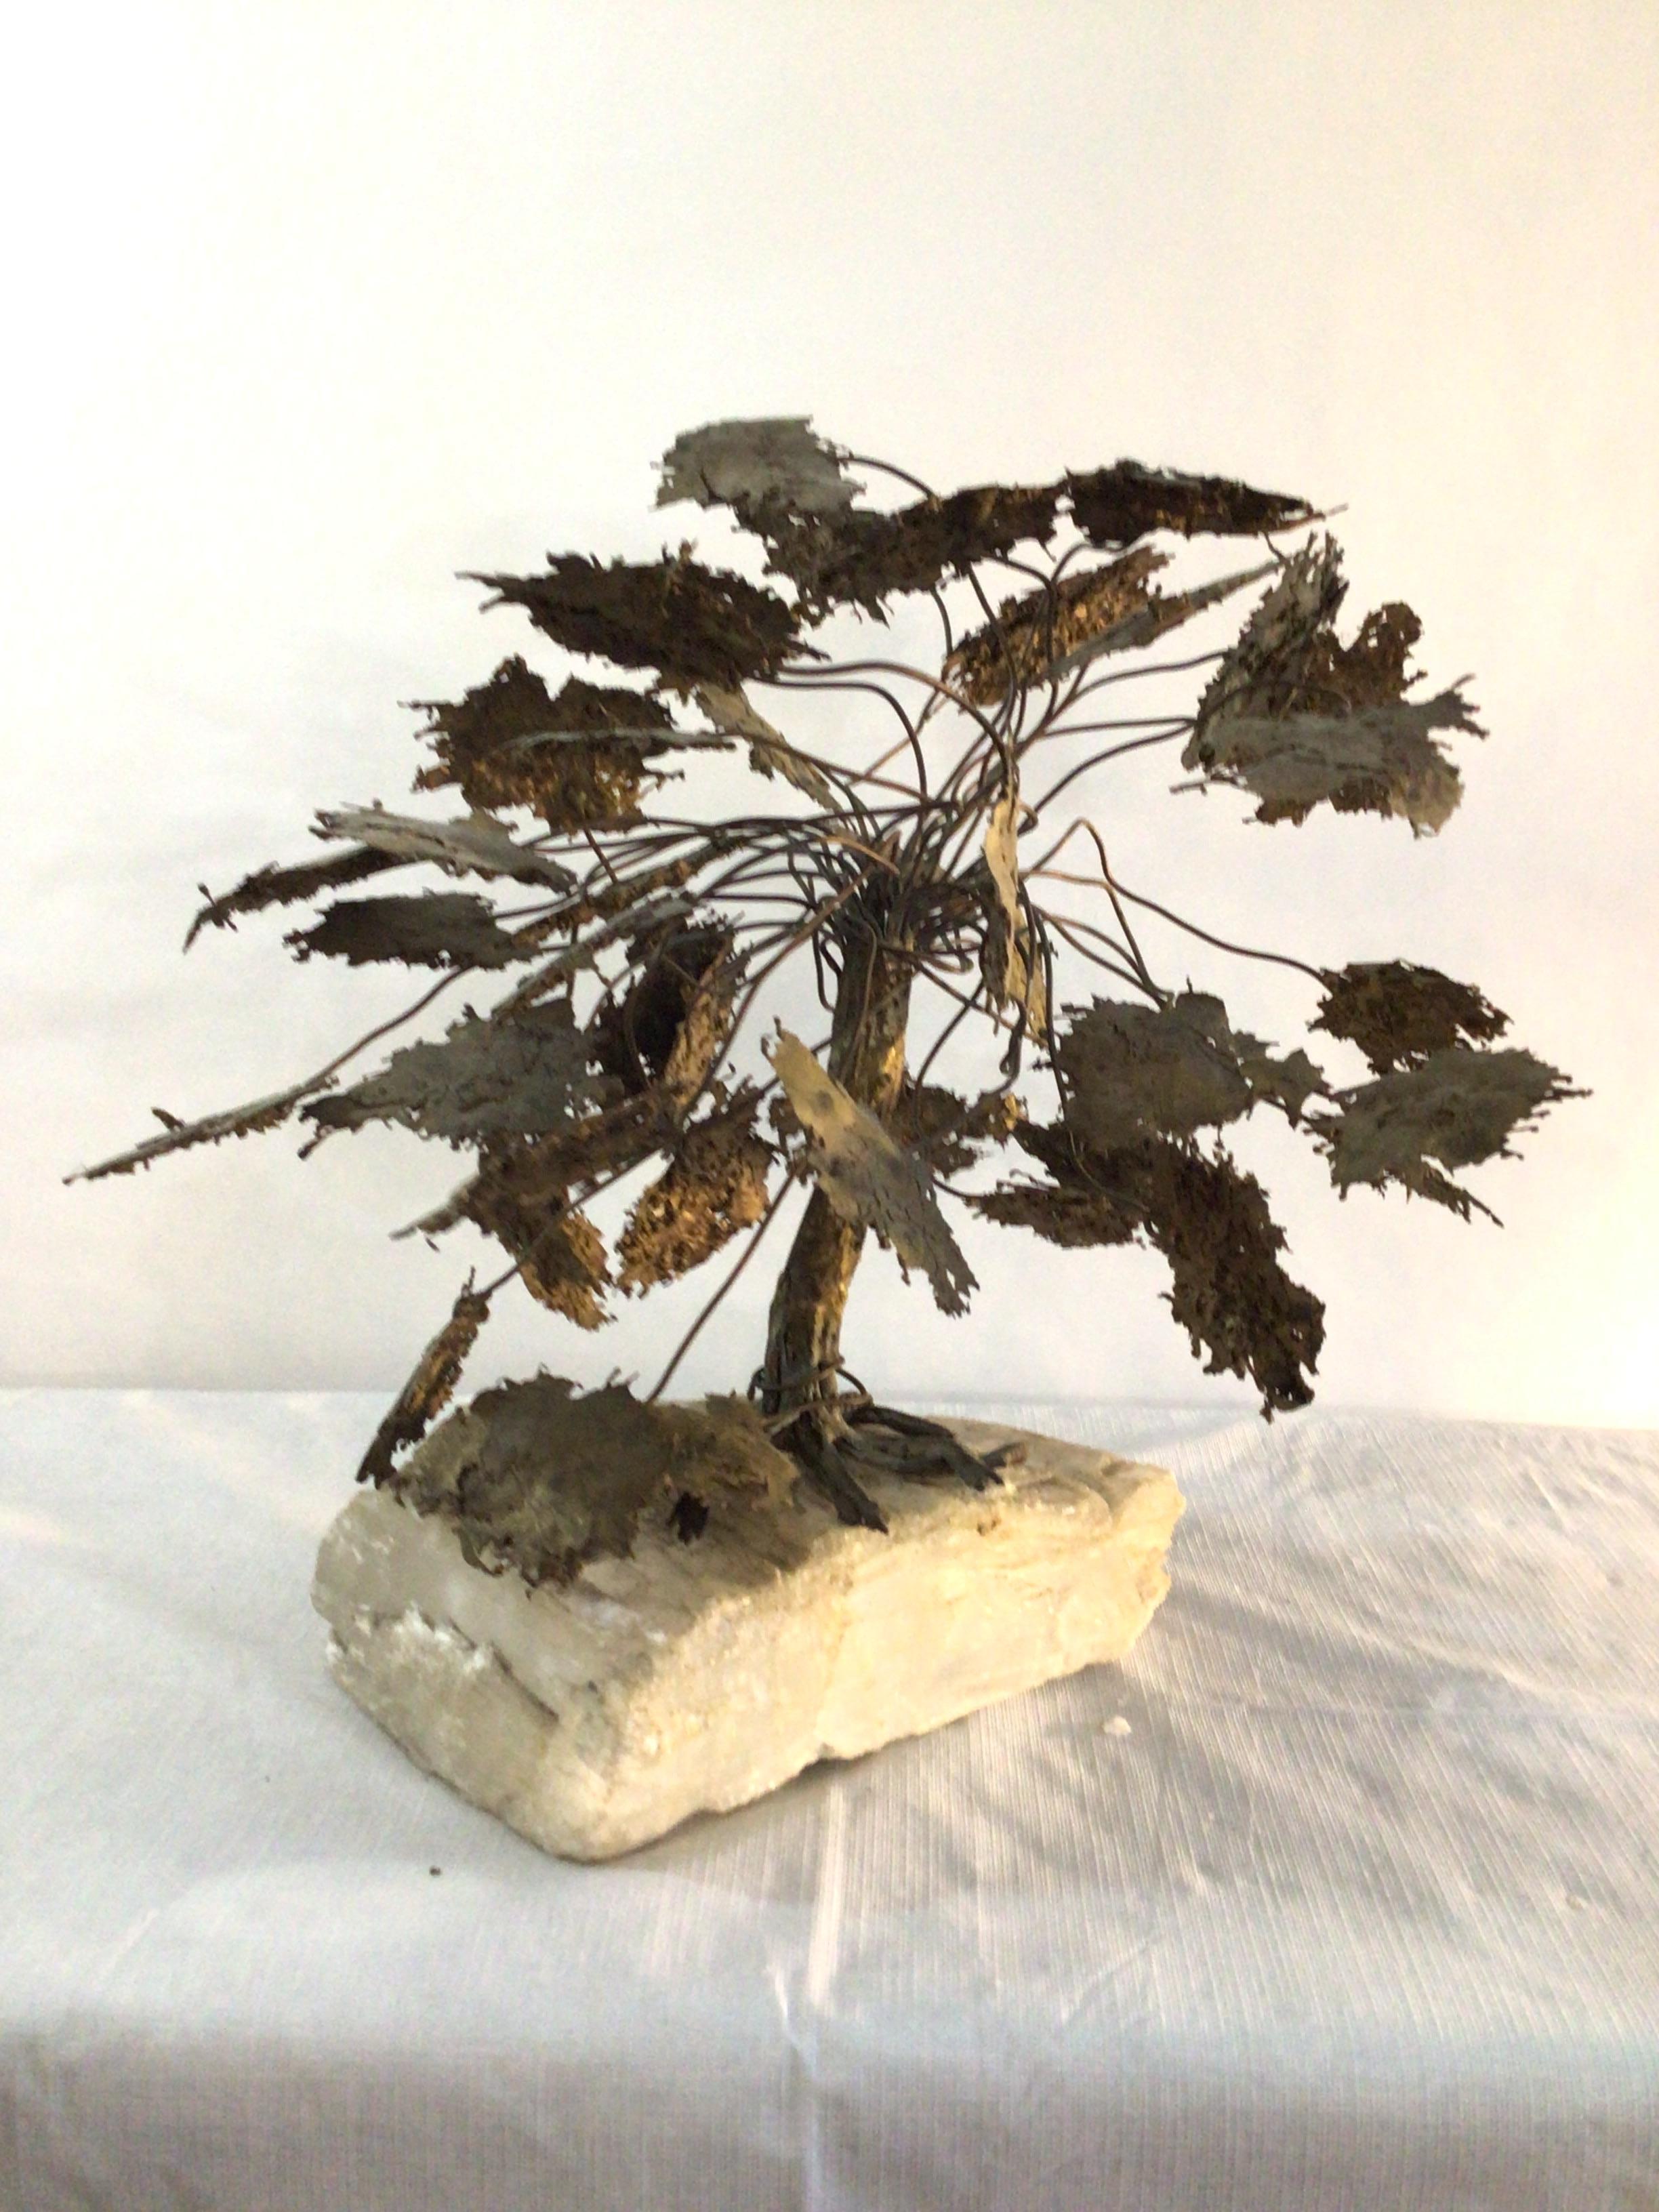 1960s Metal Tree Sculpture On Quartz Stone Base
Beautiful piece of sculpture in the form of a large tree with leaves atop a free form rock crystal base
The leaves have etched details on both the top and bottom and there is a center trunk which